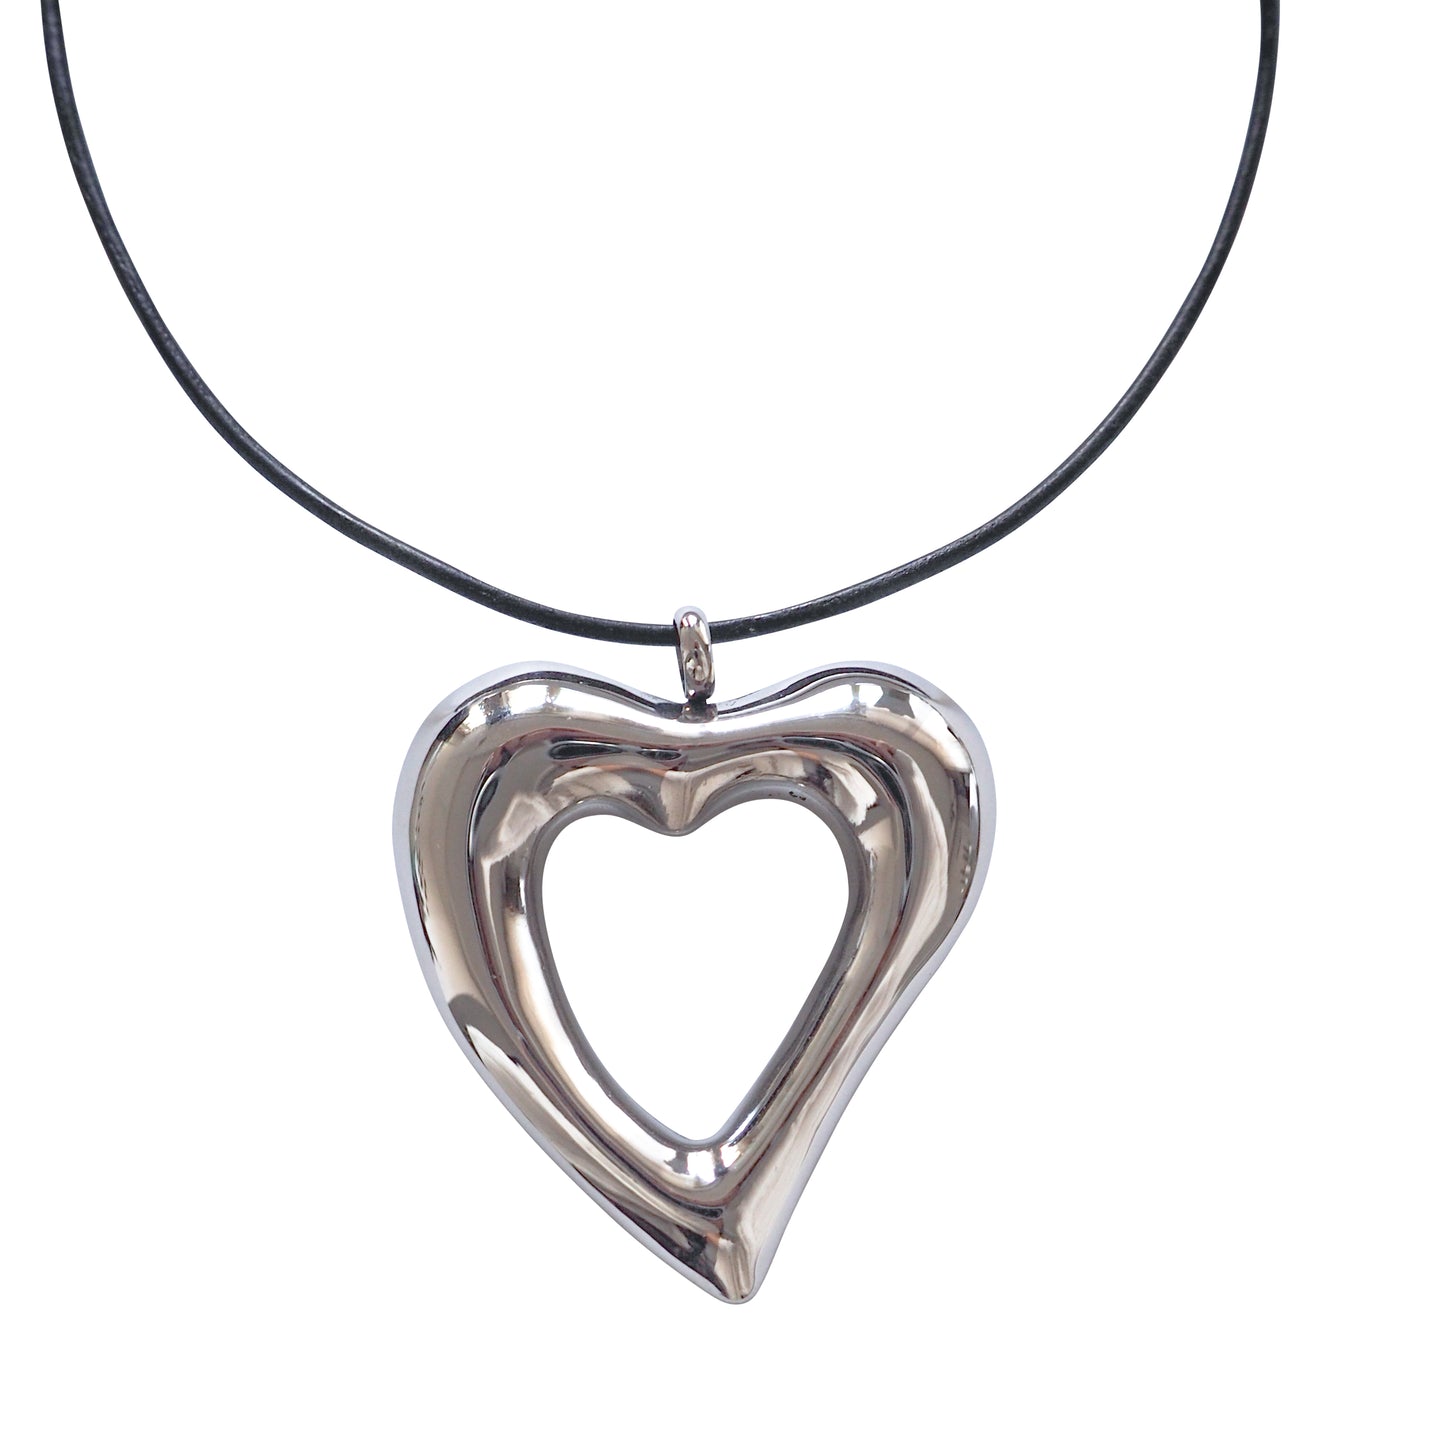 AMORE HEART CORD NECKLACE